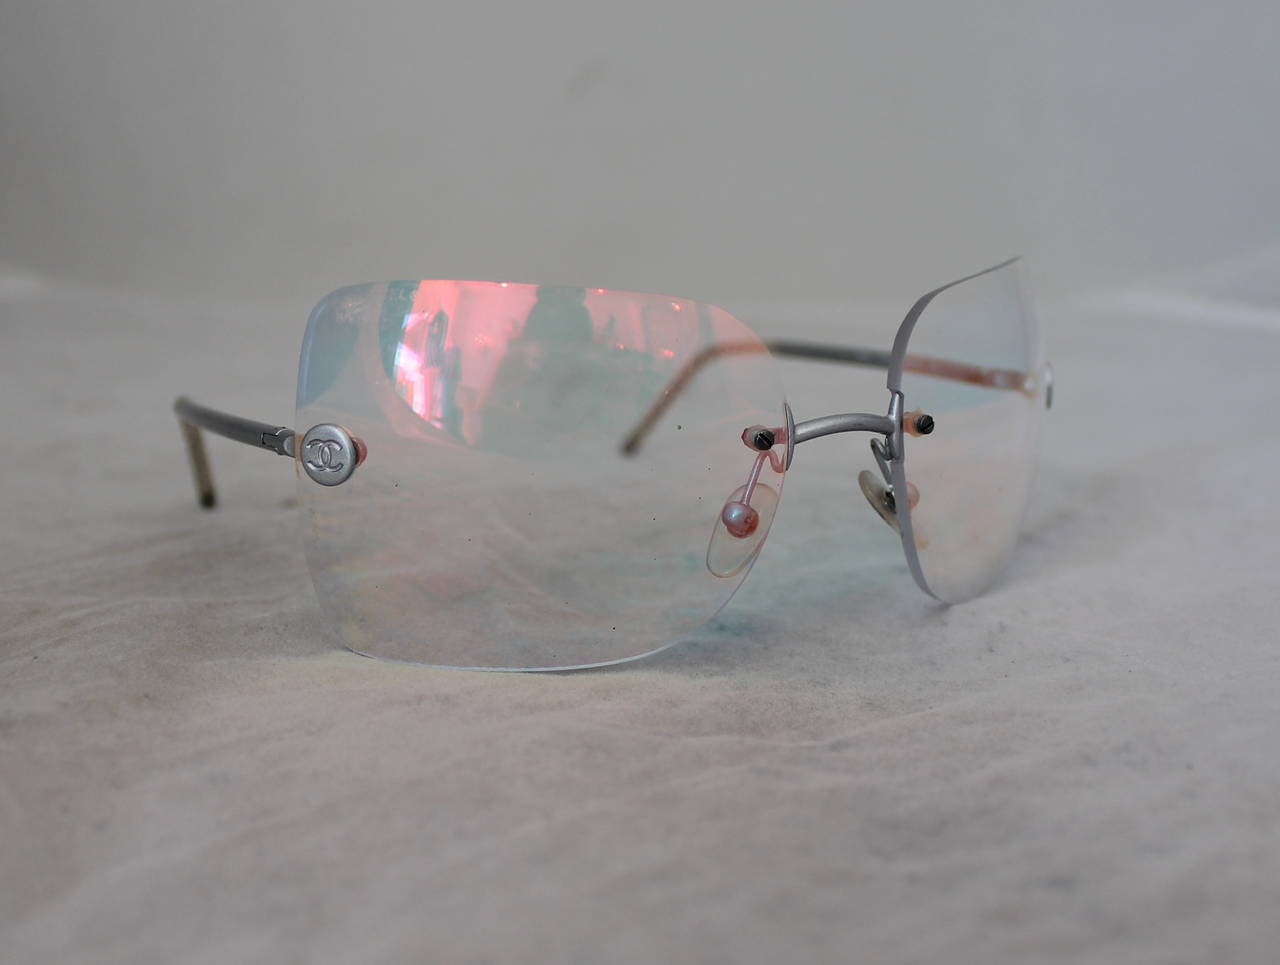 2000s Chanel Iridescent Lens Glasses with Thin Silver Arms. In Excellent Condition.

Measurements:
Front: 5.75 